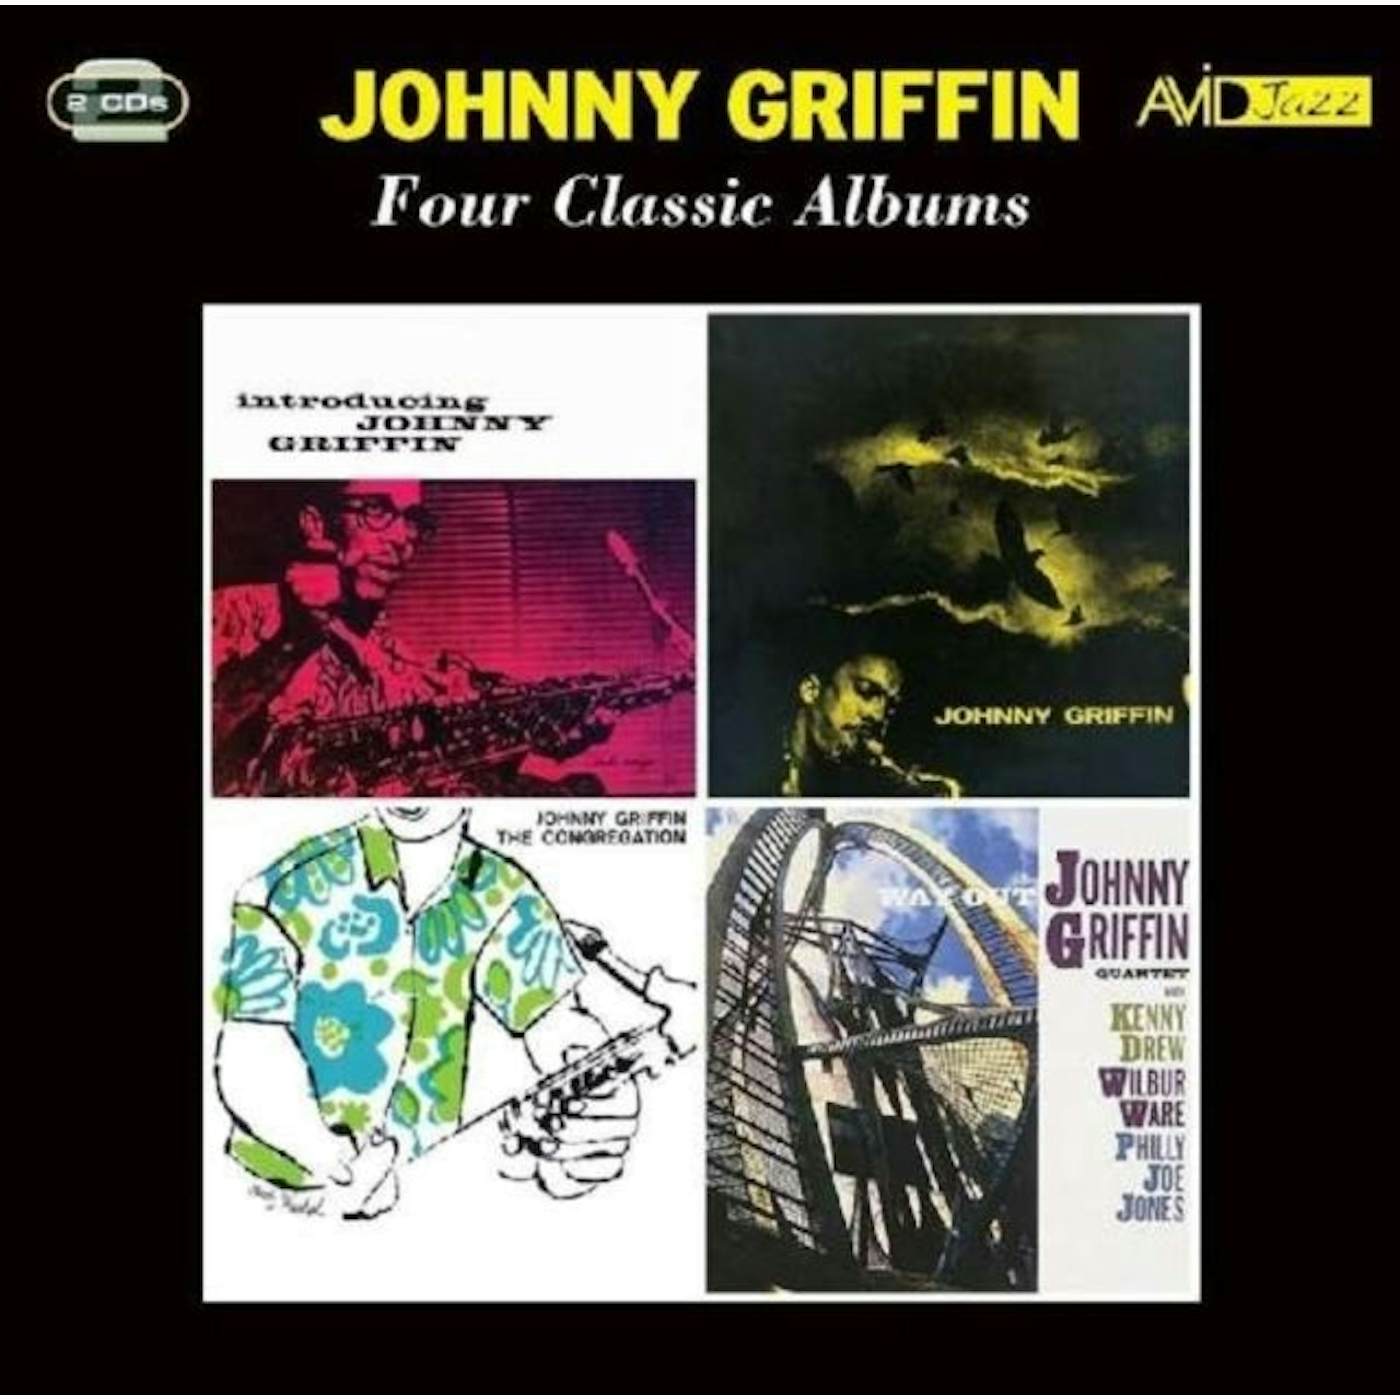 Johnny Griffin CD - Four Classic Albums (Introducing Johnny Griffin / A Blowing Session / The Congregation / Way Out)